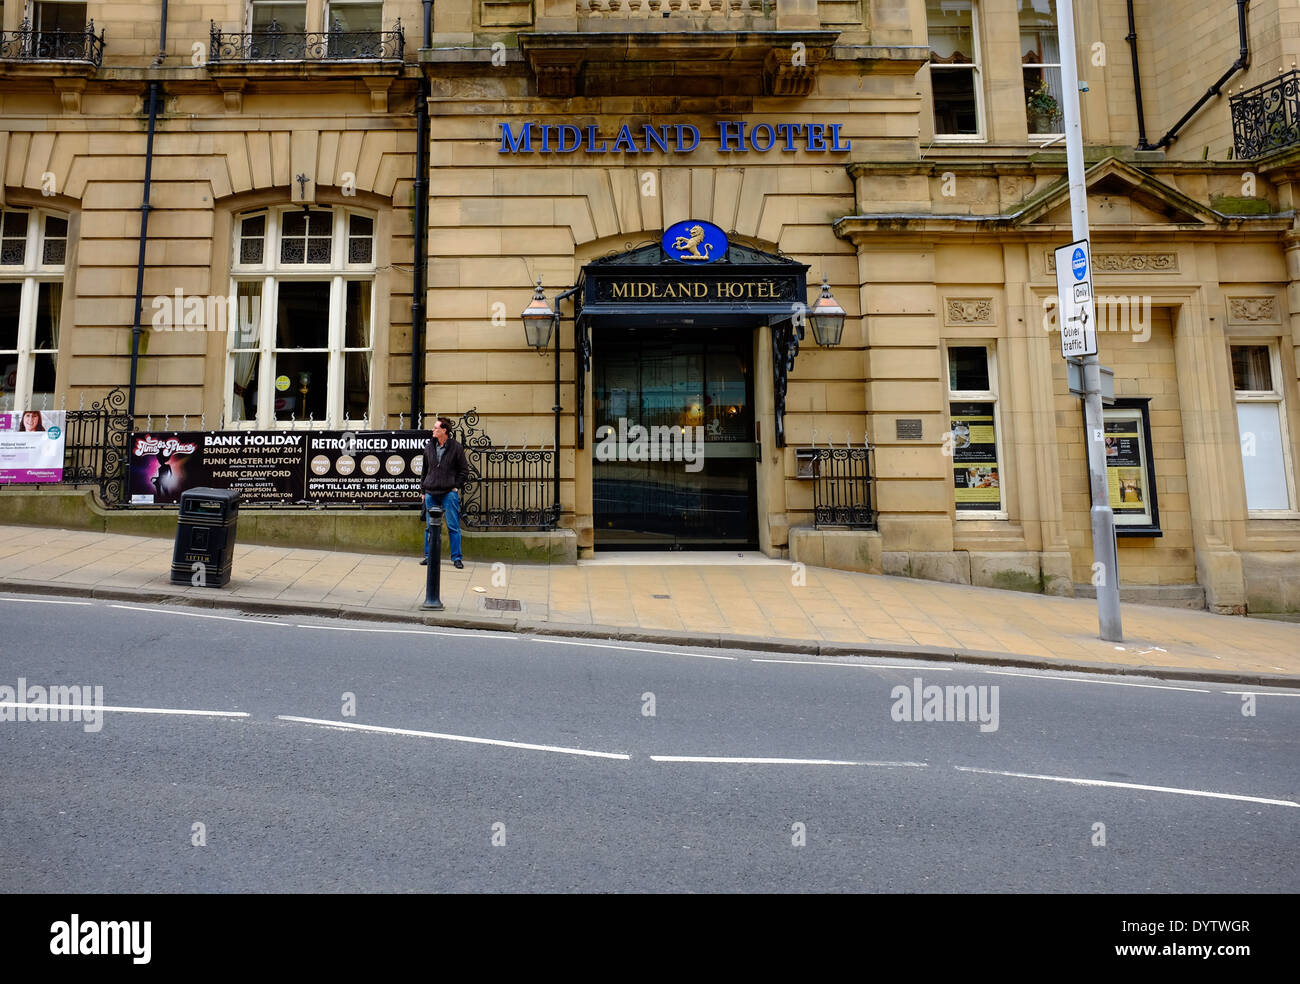 The front entrance of the Midland Hotel in Bradford, West Yorkshire, UK. A man waits outside. Stock Photo